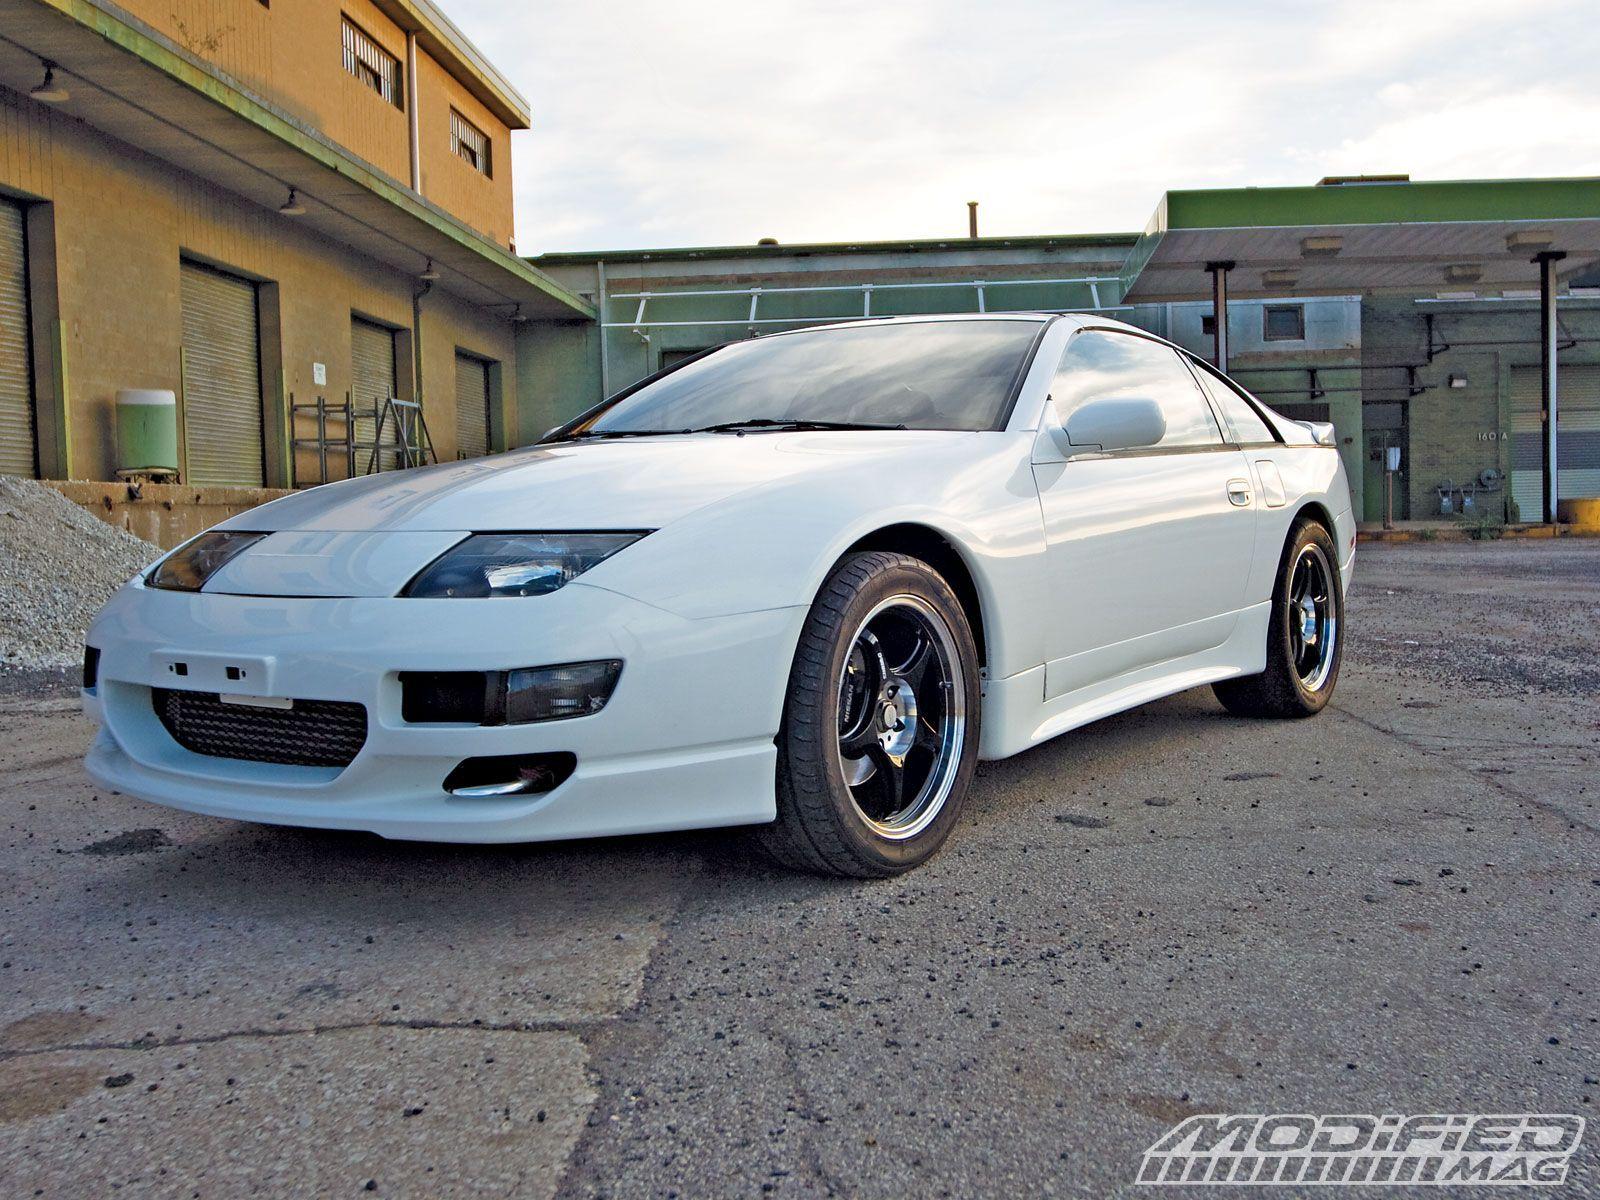 Andy Turpin's 1990 Nissan 300ZX Twin Turbo